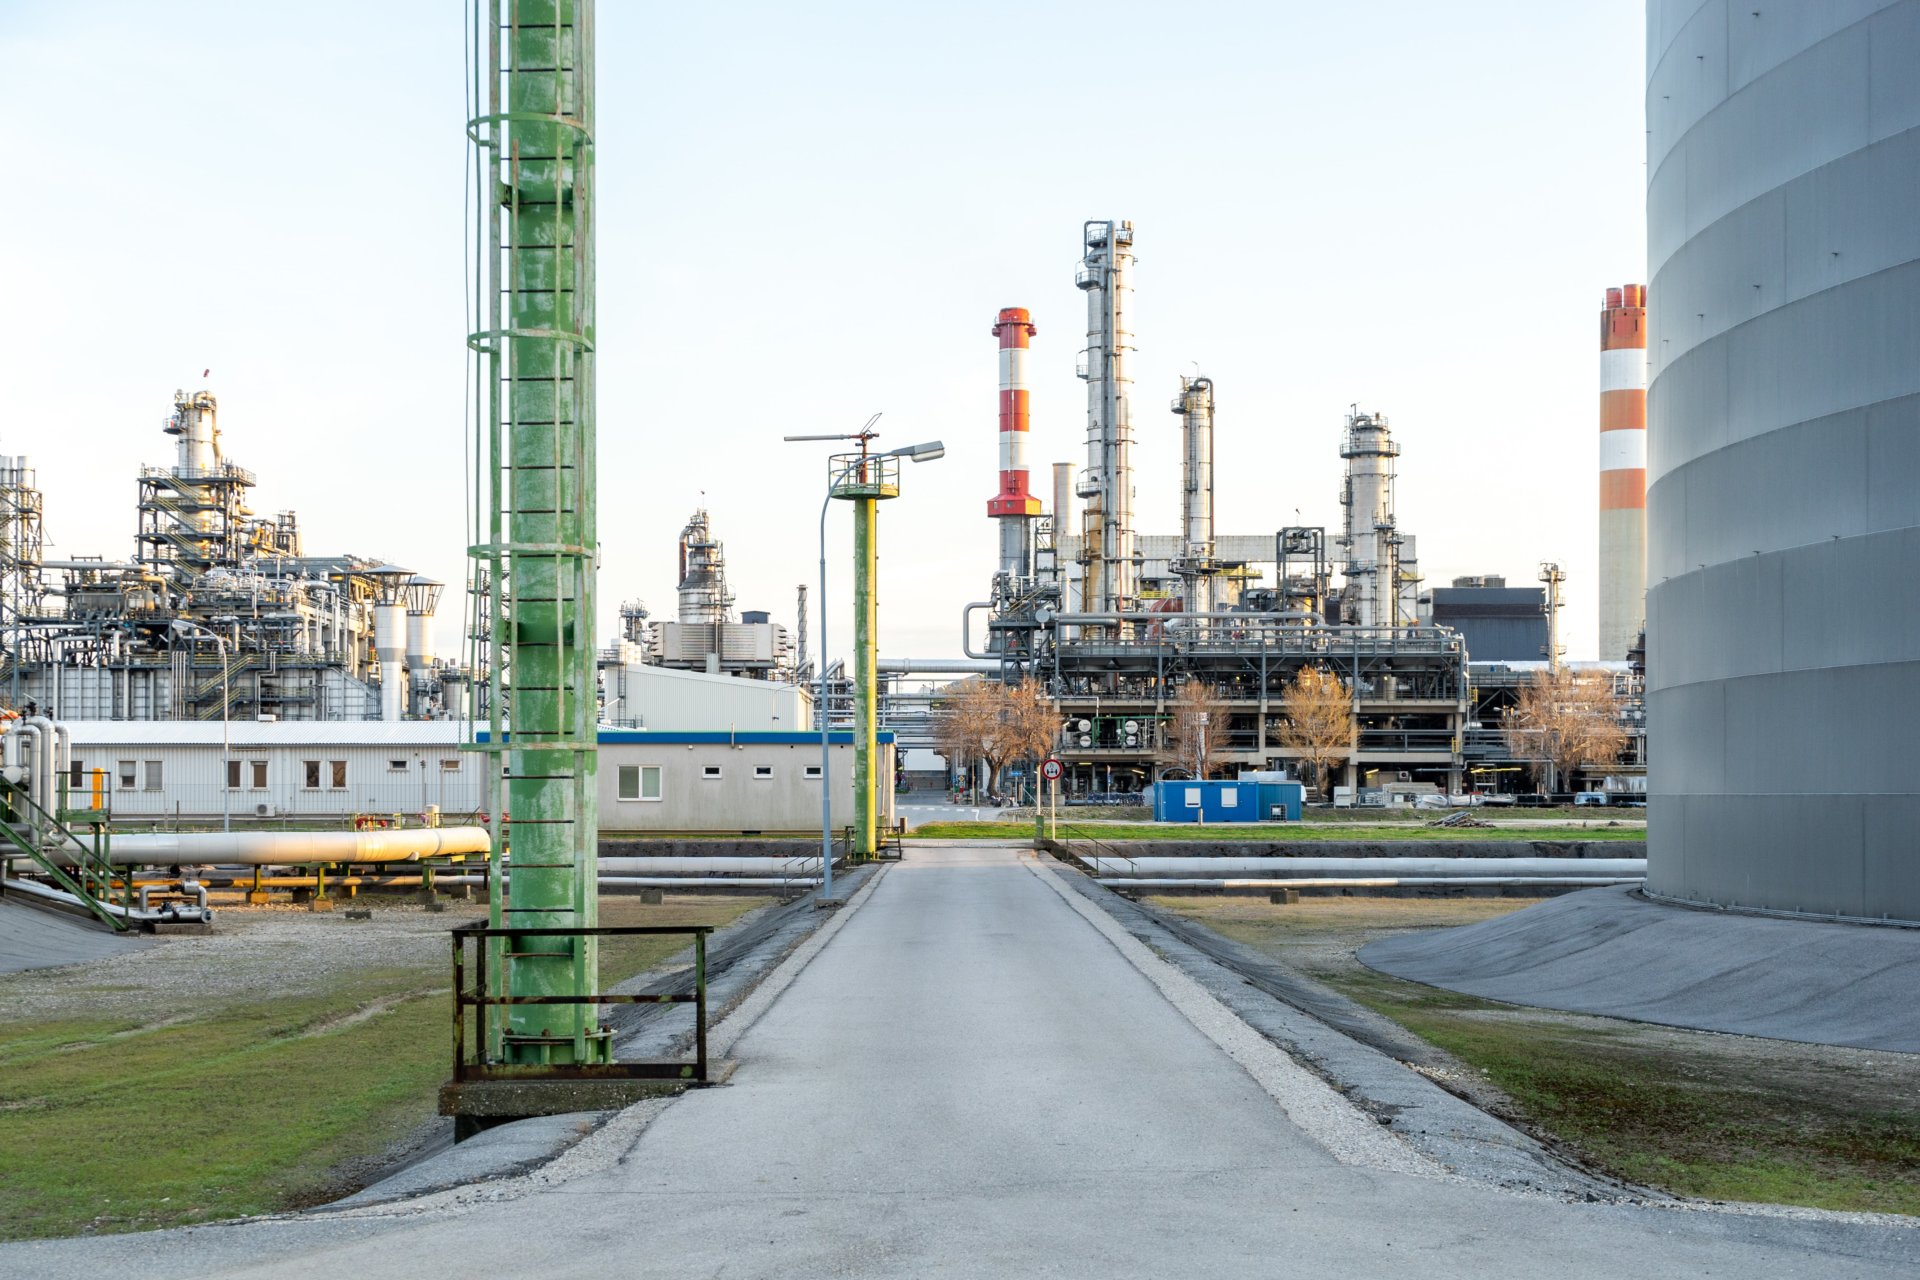 Oil refinery against pale blue sky